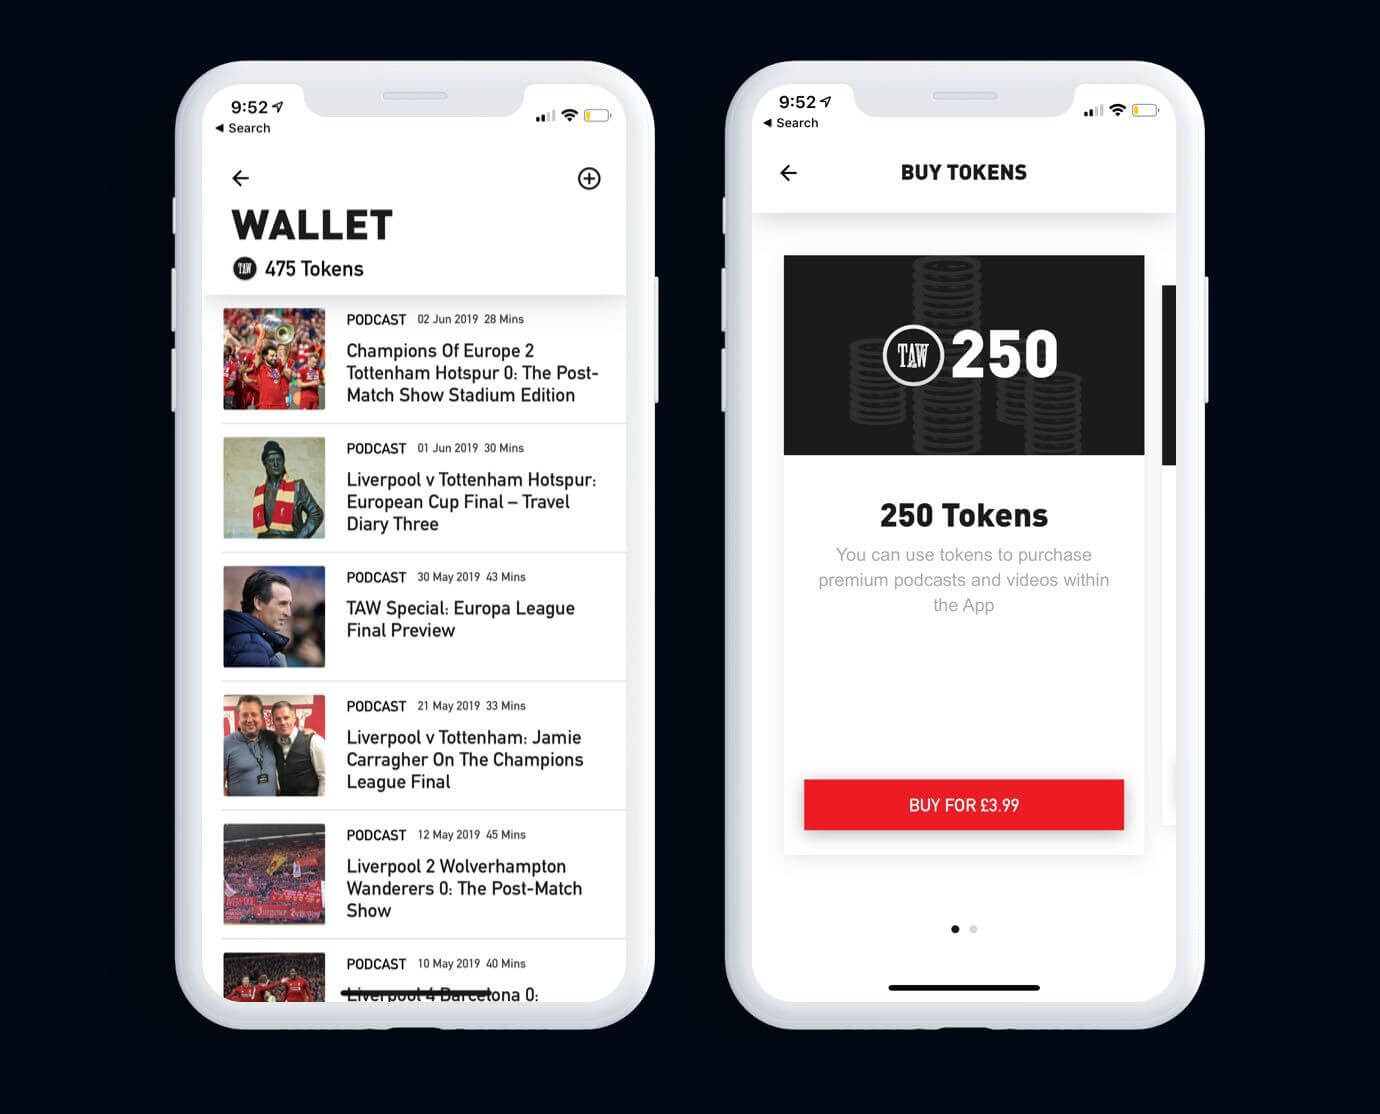 The Anfield Wrap custom wallet and tokens app